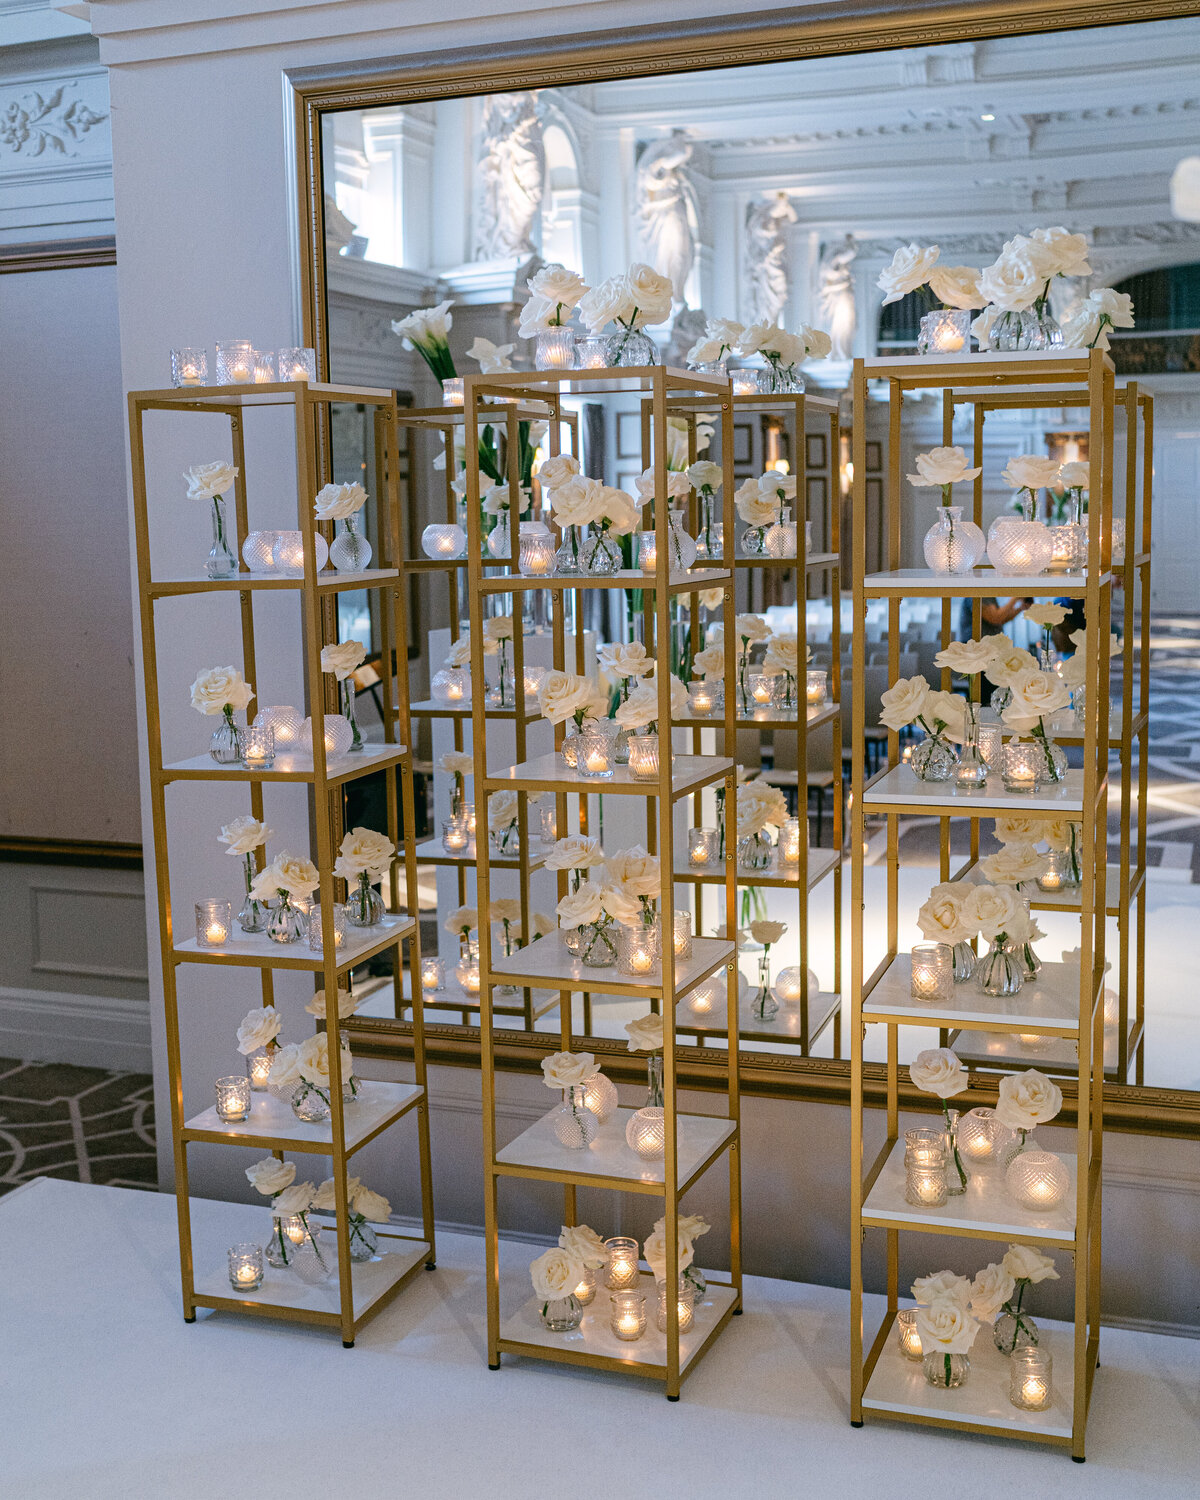 White wedding floral ceremony with modern design at the Kimpton Fitzroy hotel in London